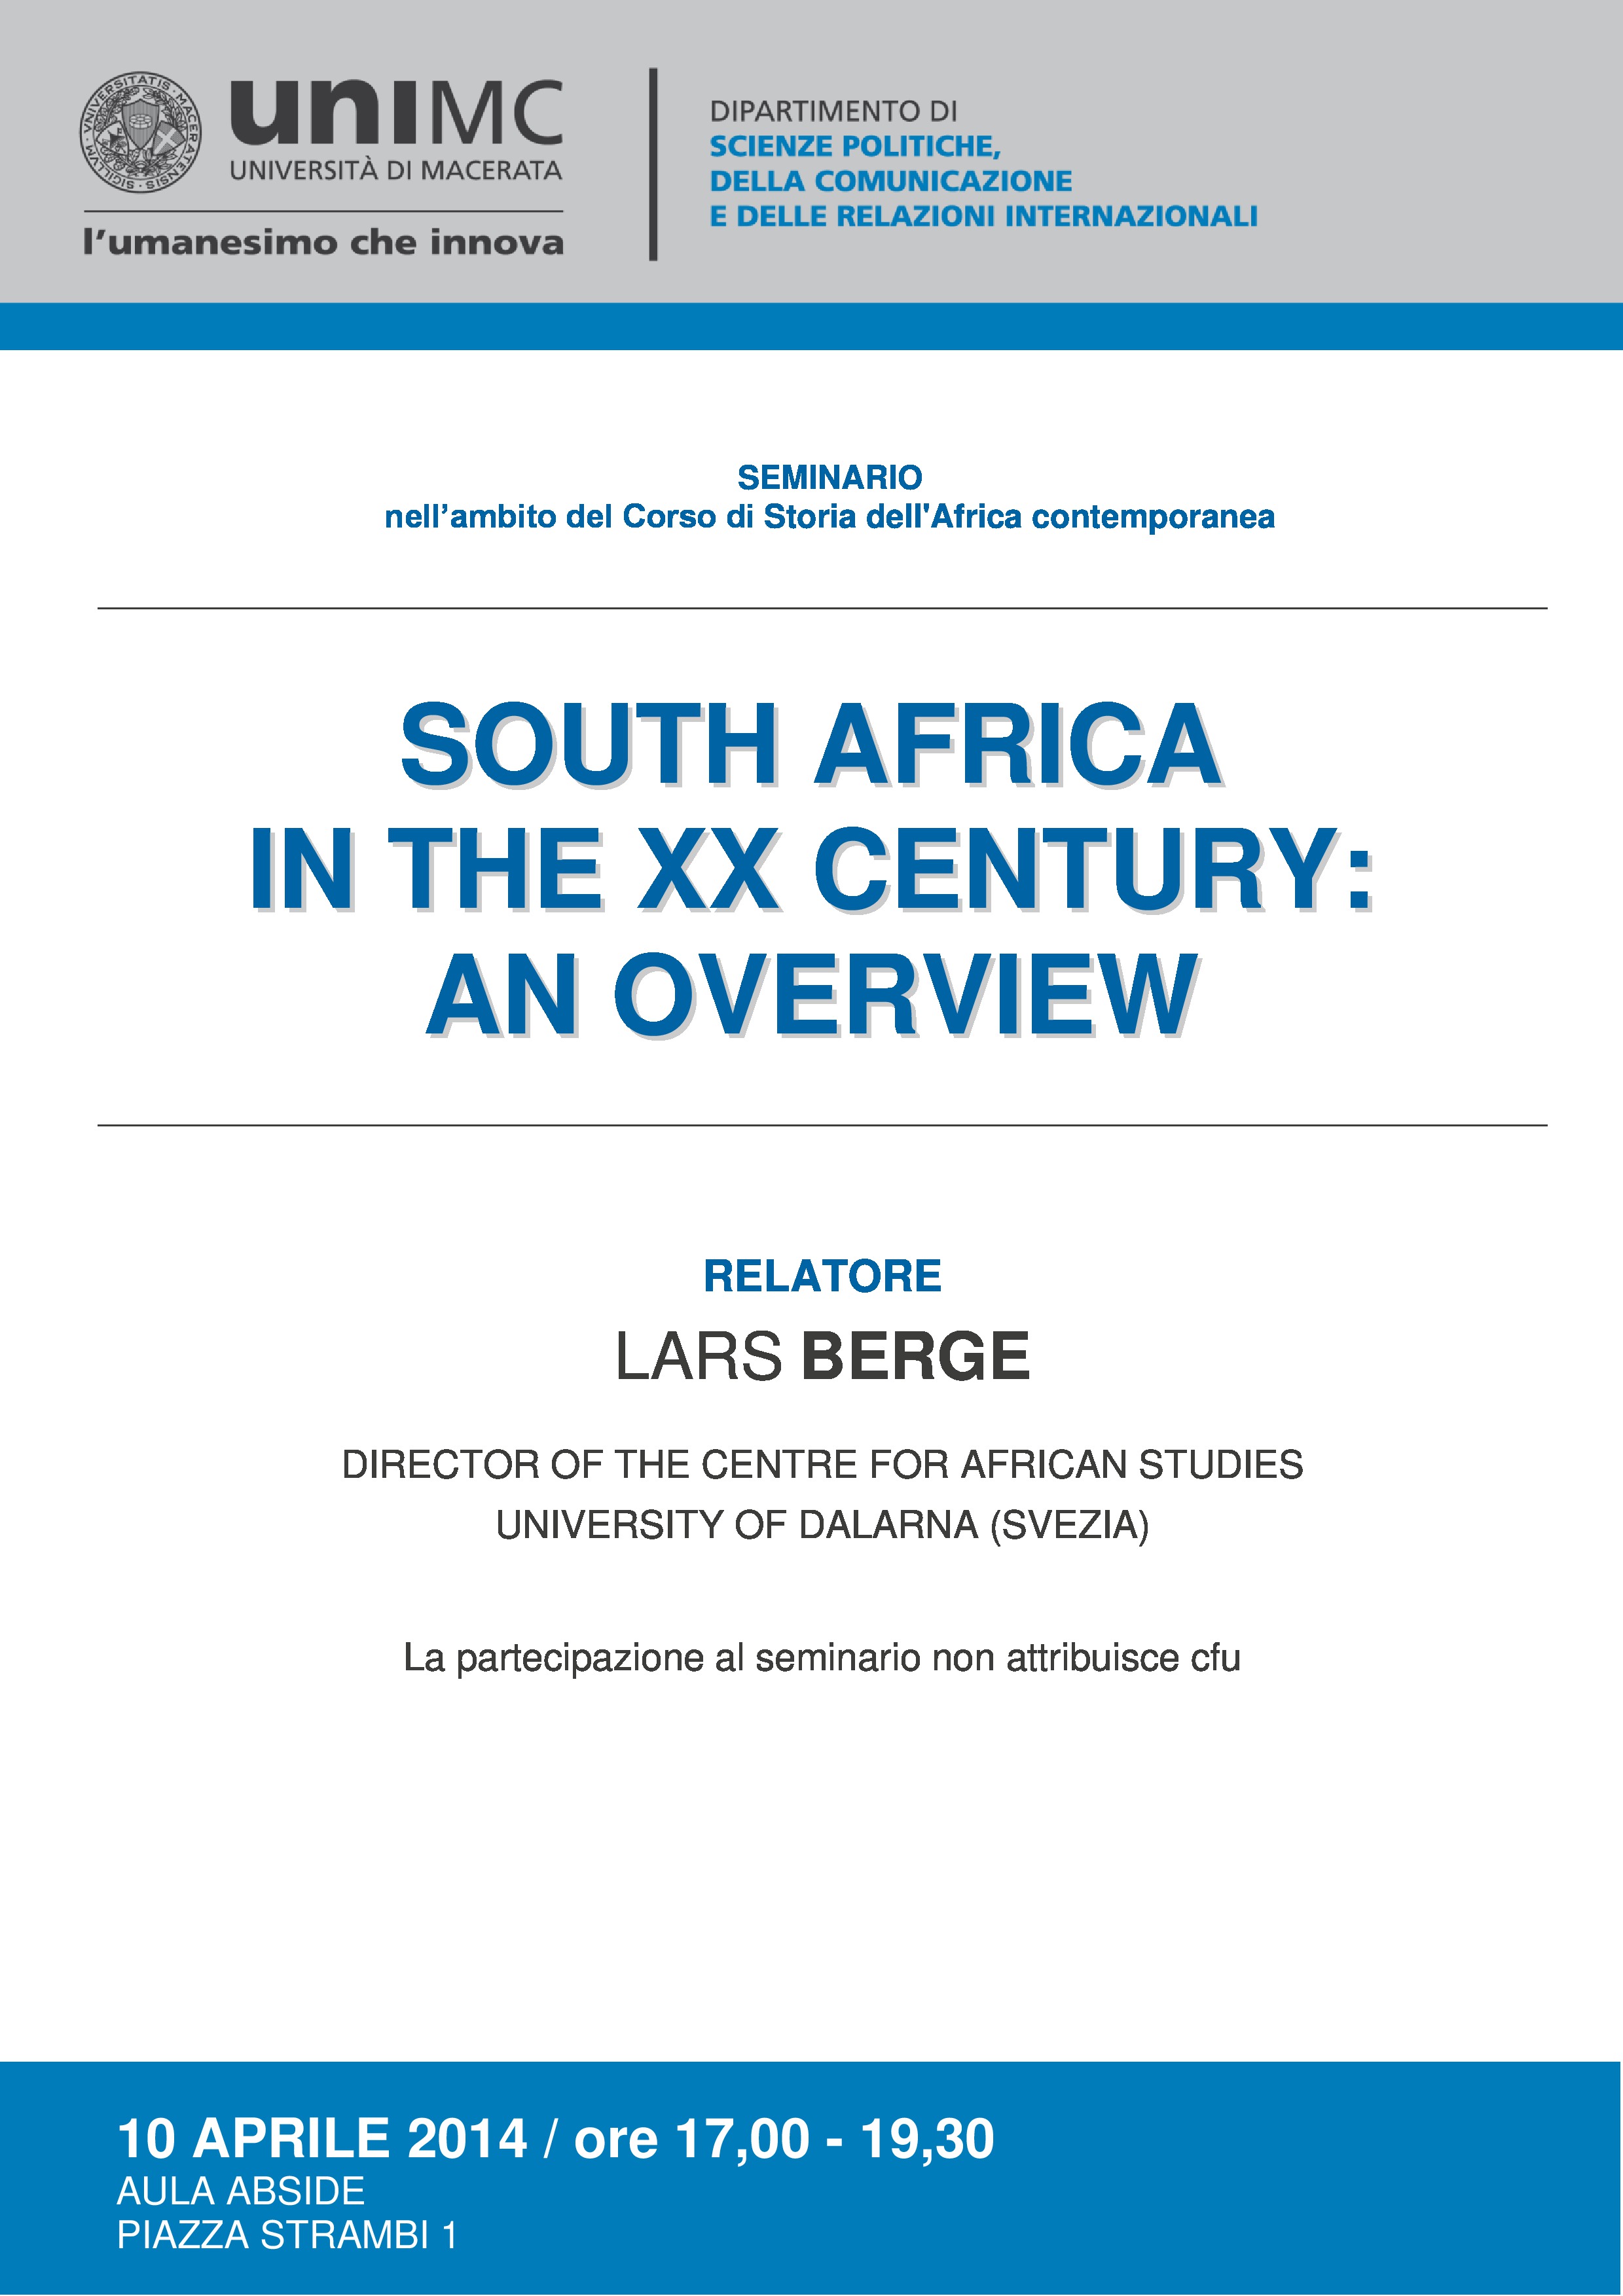 South Africa in the XX Century: an overview